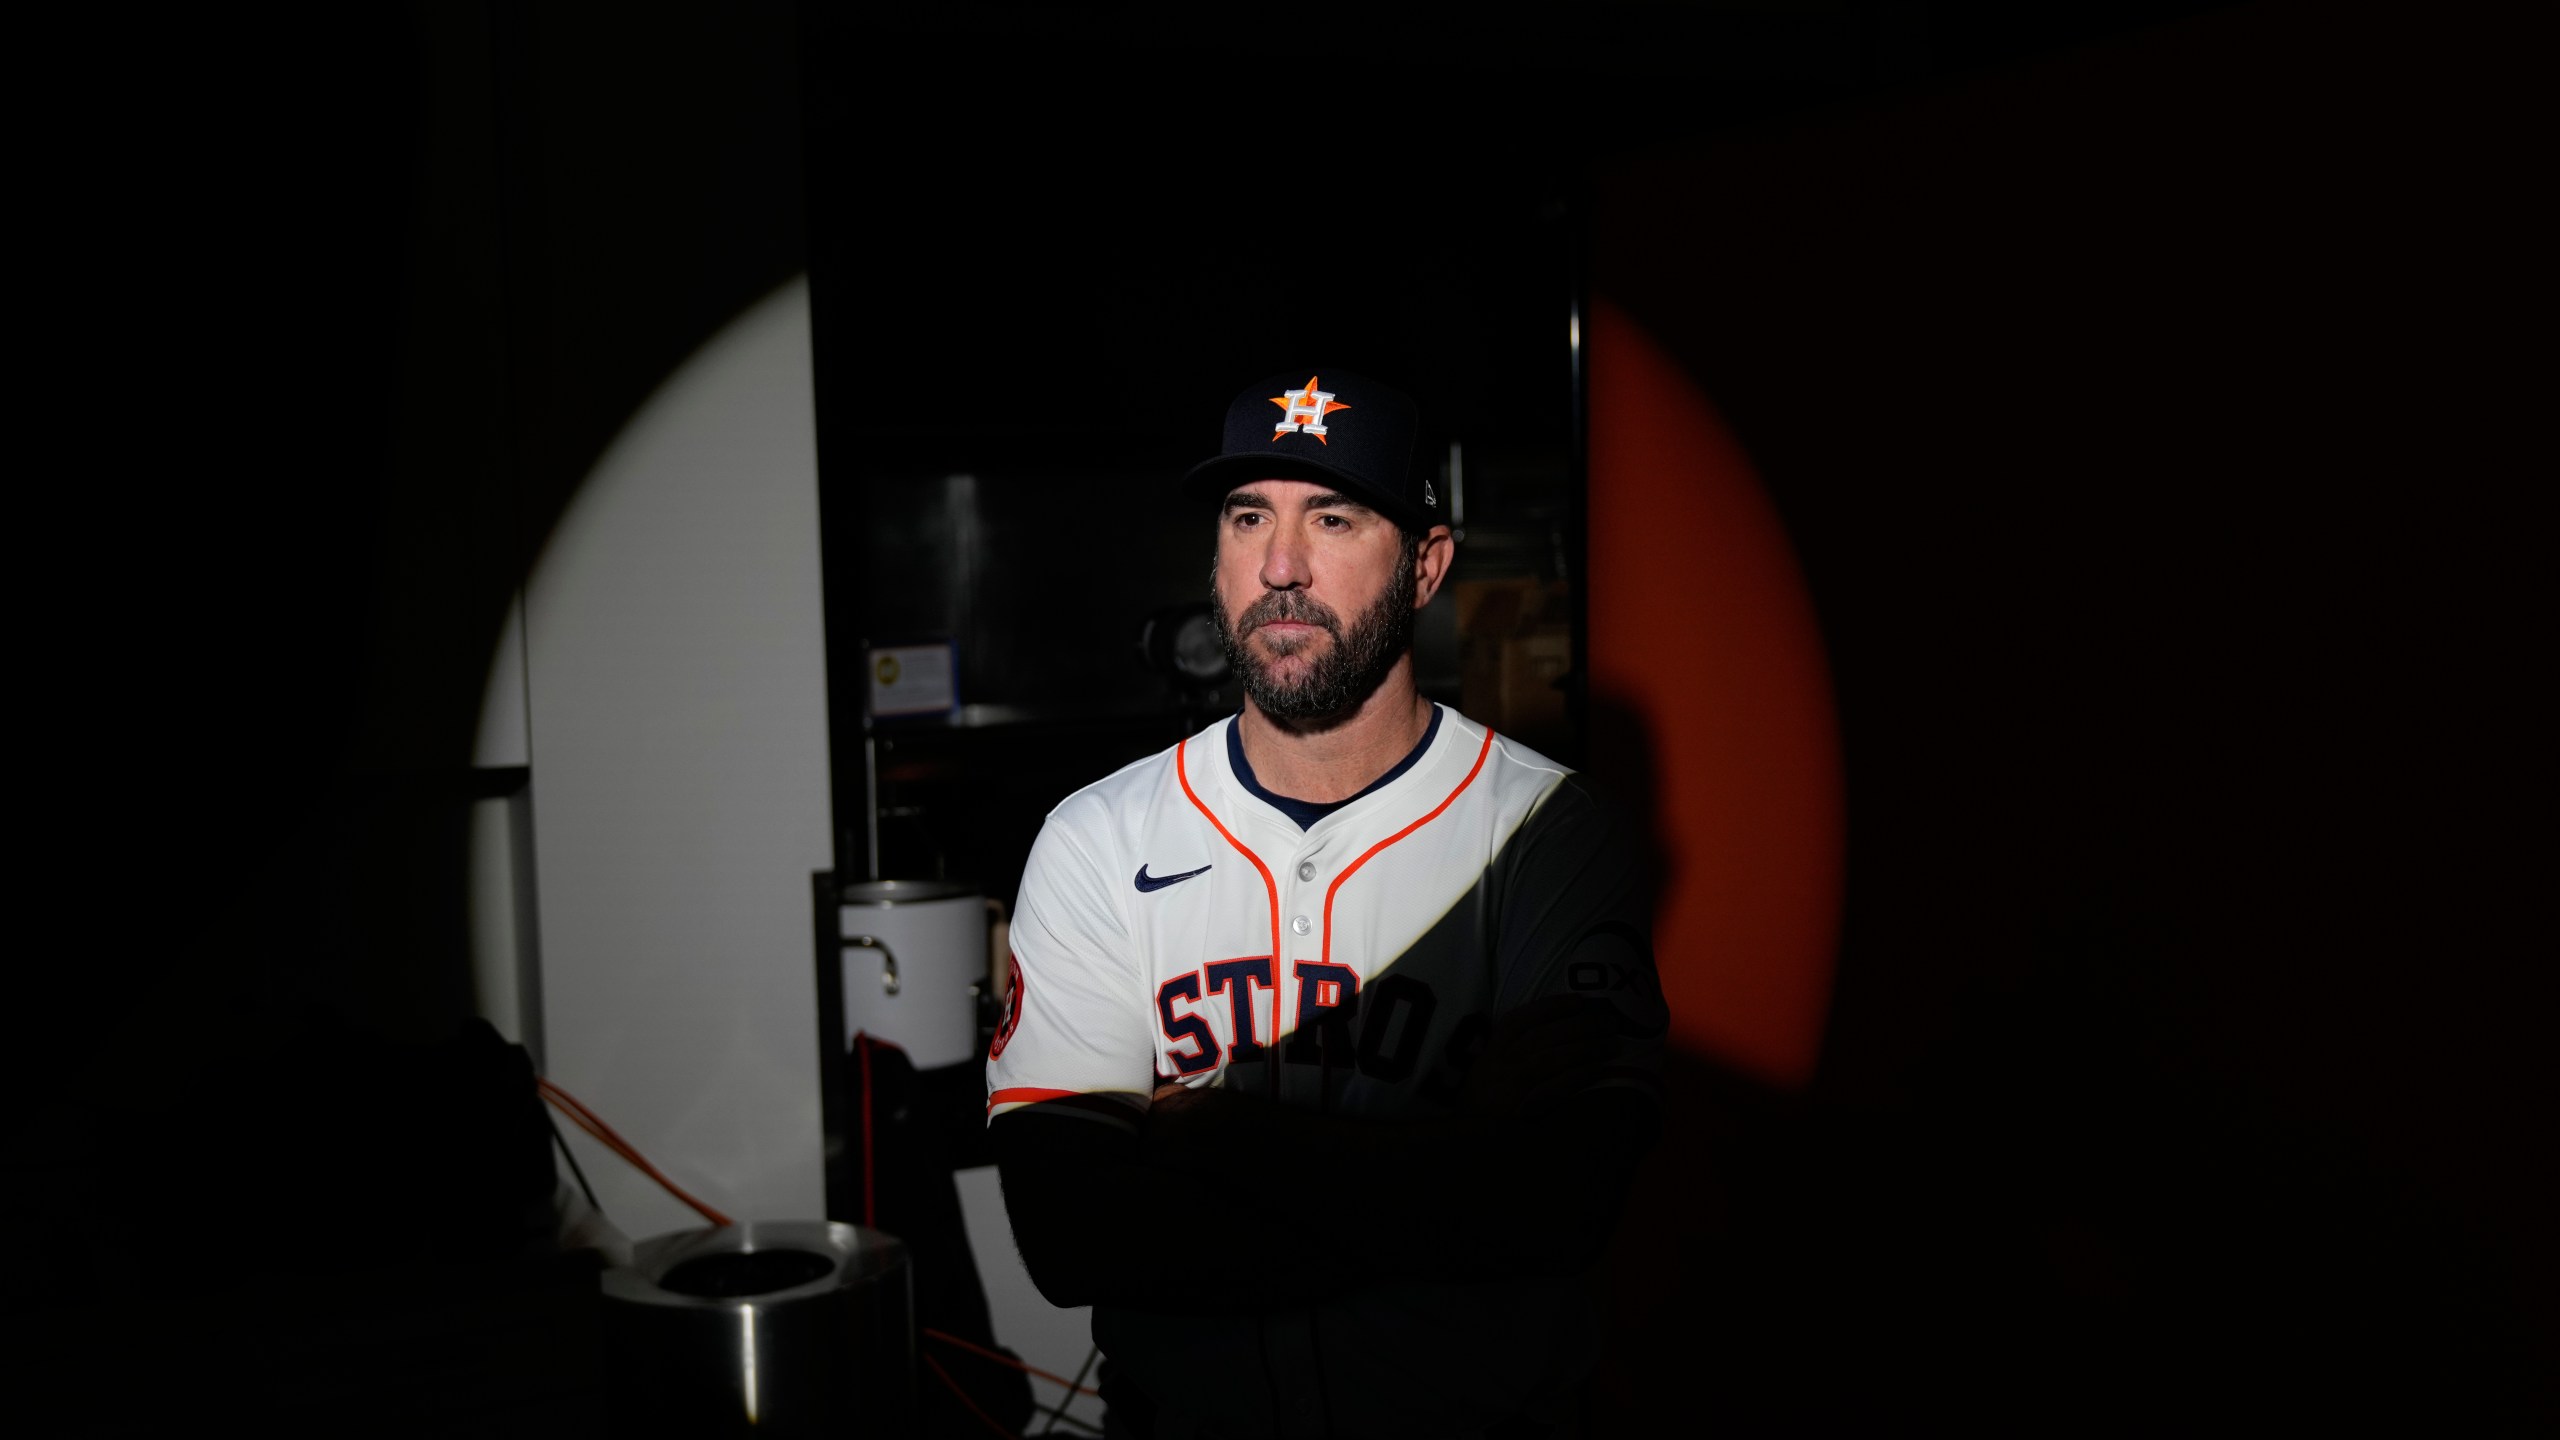 Pitcher Justin Verlander of the Houston Astros baseball team stands in a circle of light as he poses for a photographer during the team's media day, Wednesday, Feb. 21, 2024, in West Palm Beach, Fla. (AP Photo/Rebecca Blackwell)